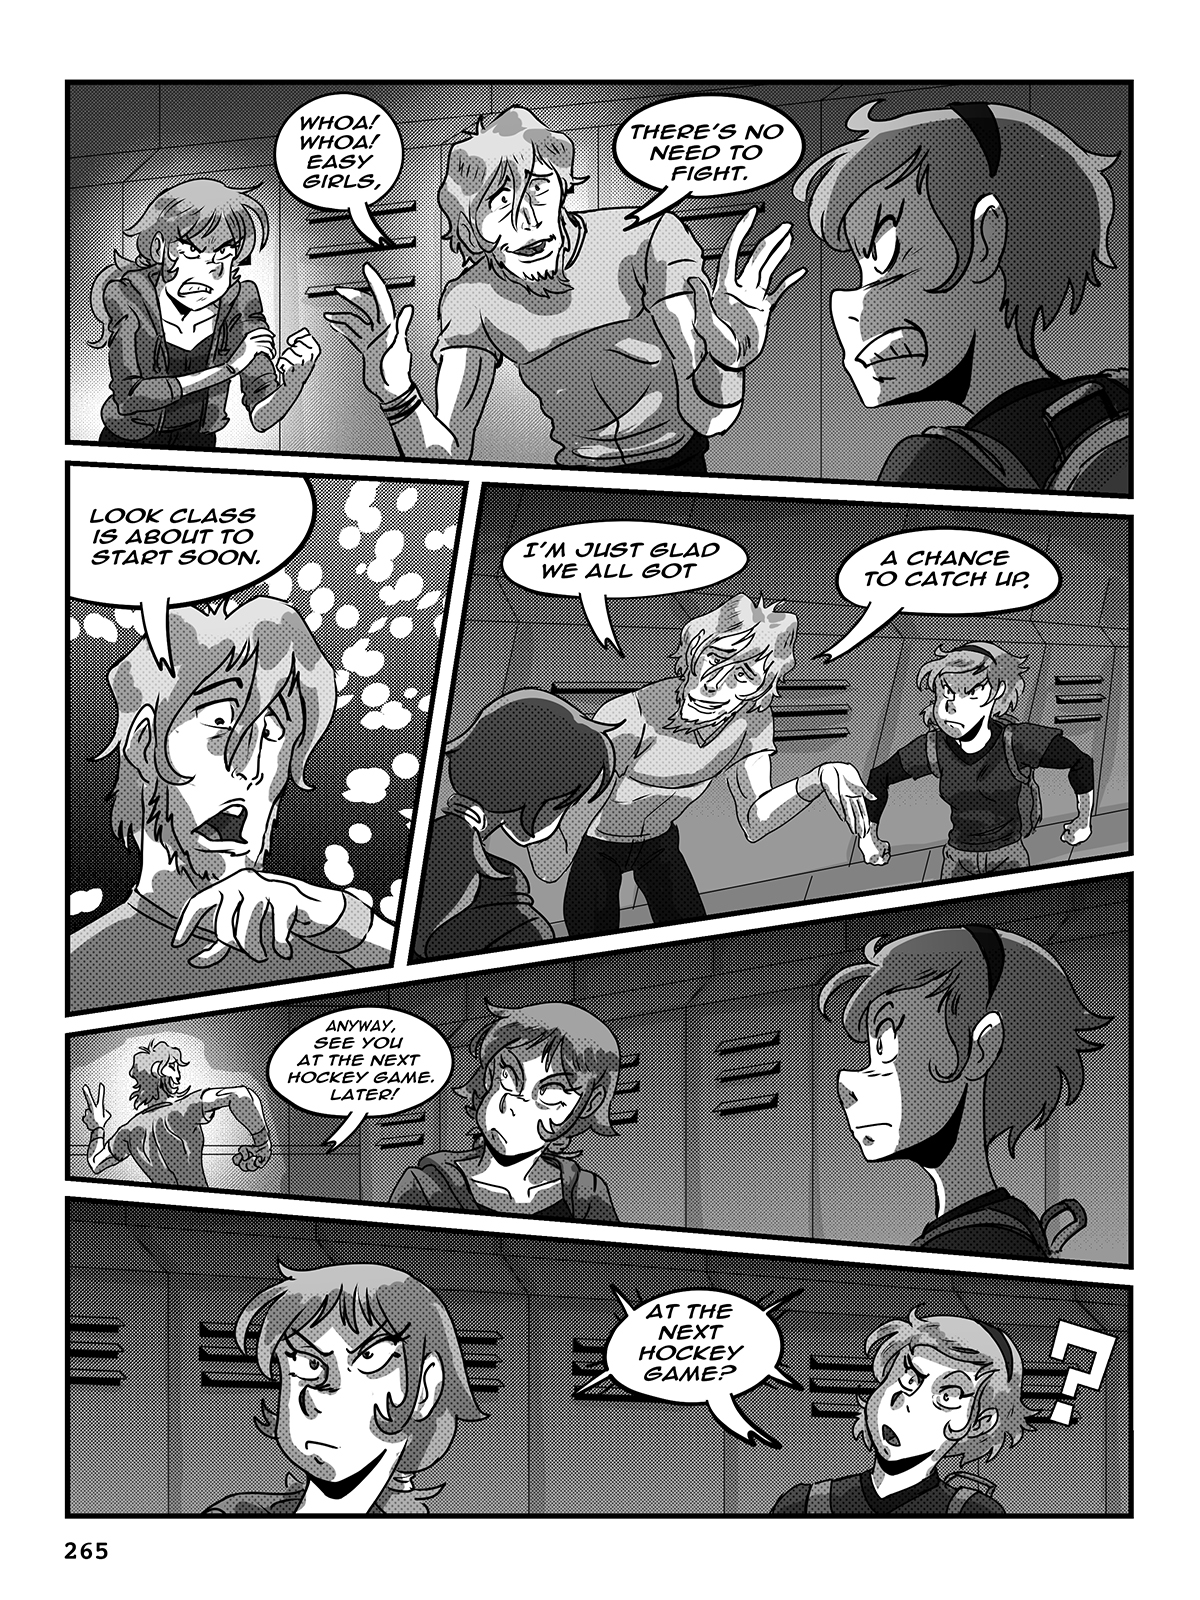 Hockey, Love, & GUTS! – Chapter 9 – Page 265